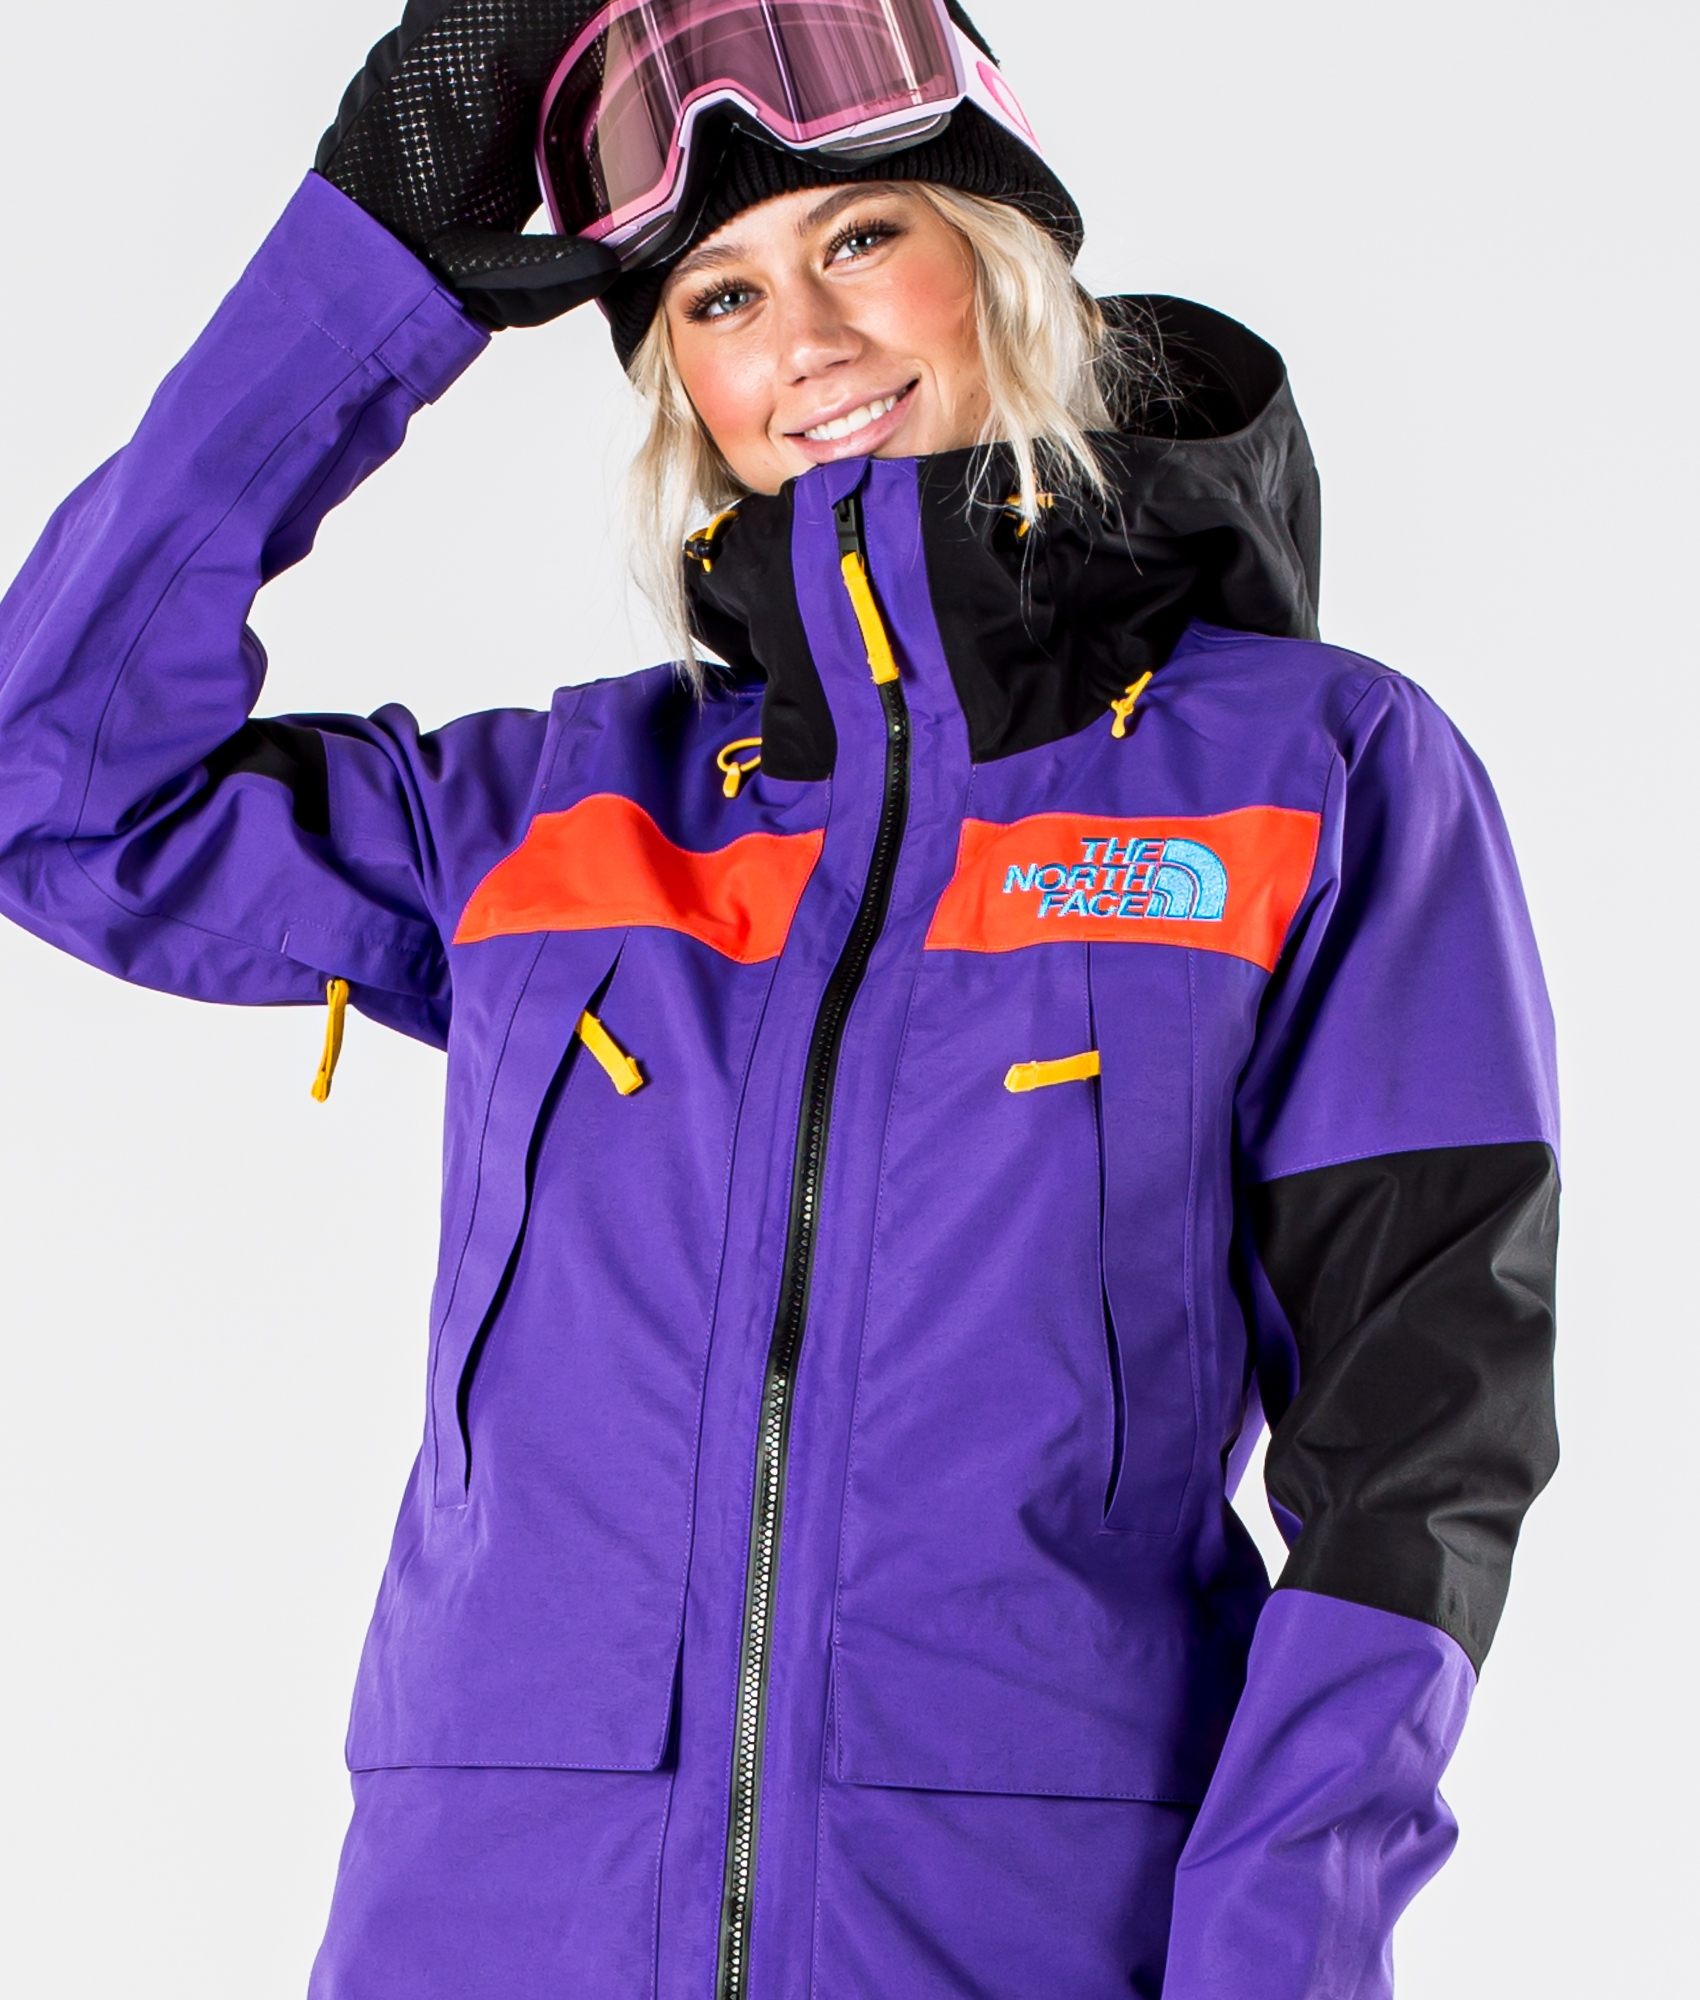 The North Face Team Kit Snowboard 